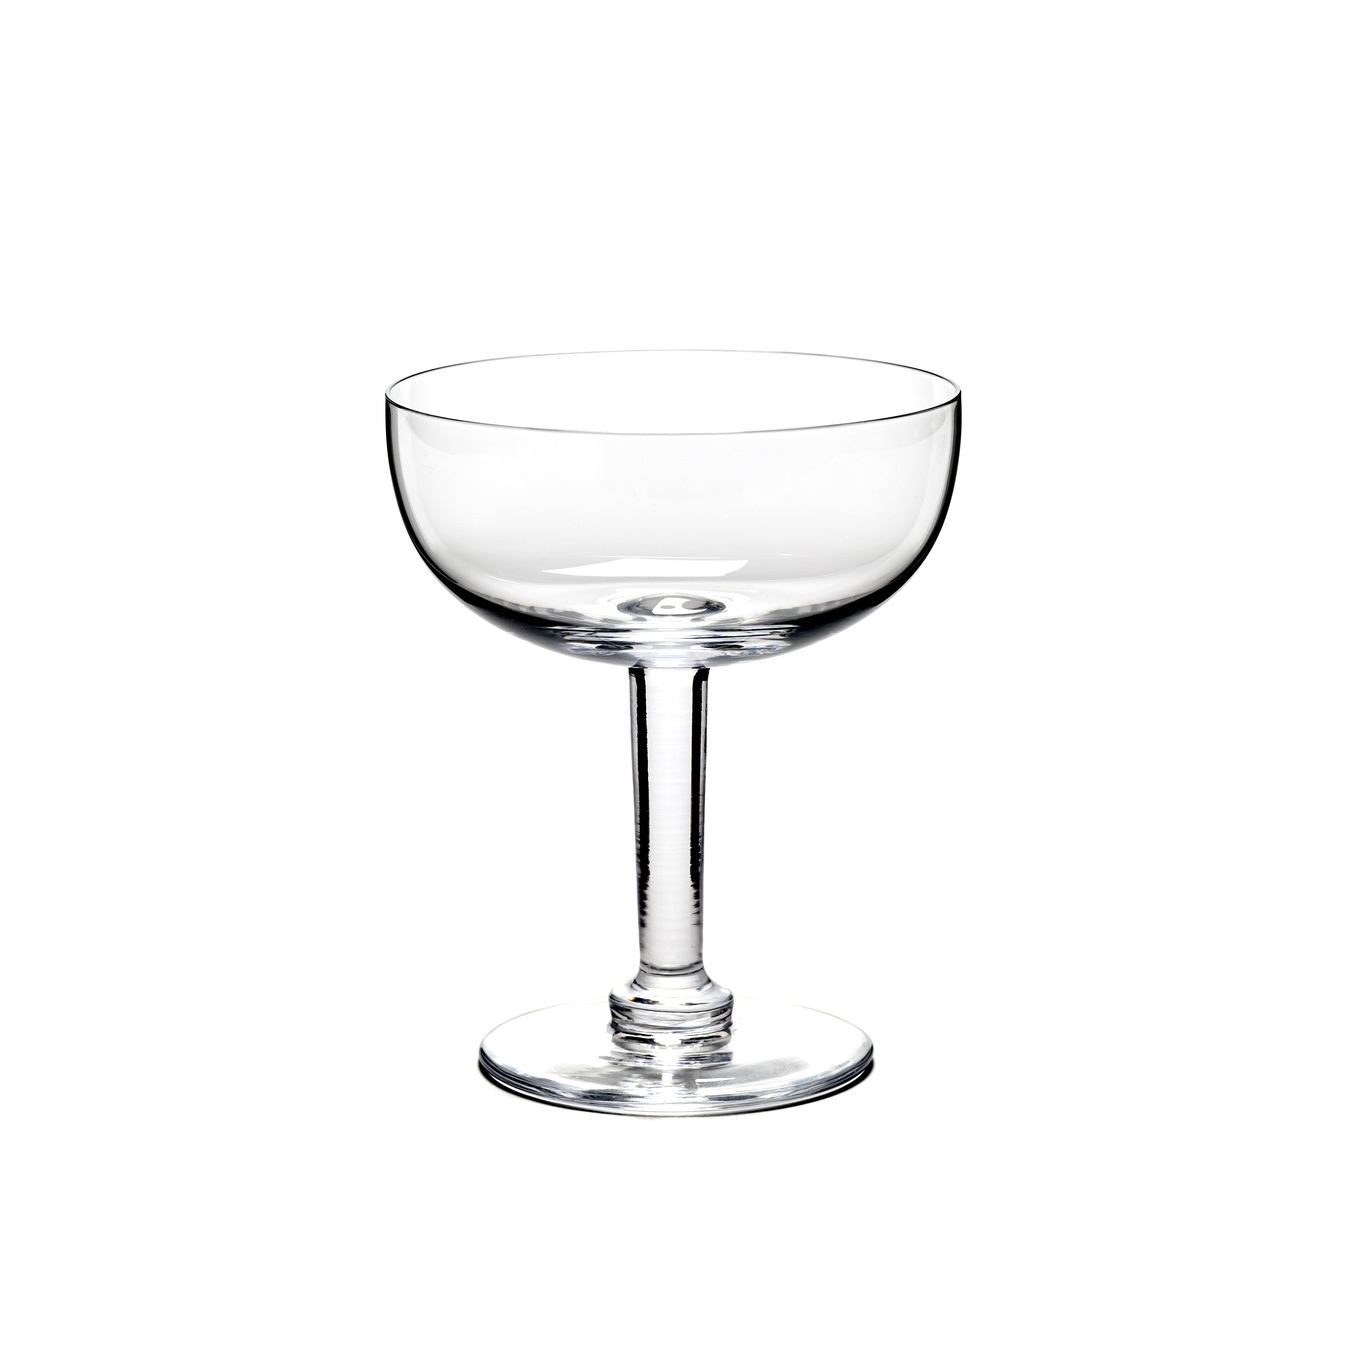 Take Time Boxy's Champagne coupe